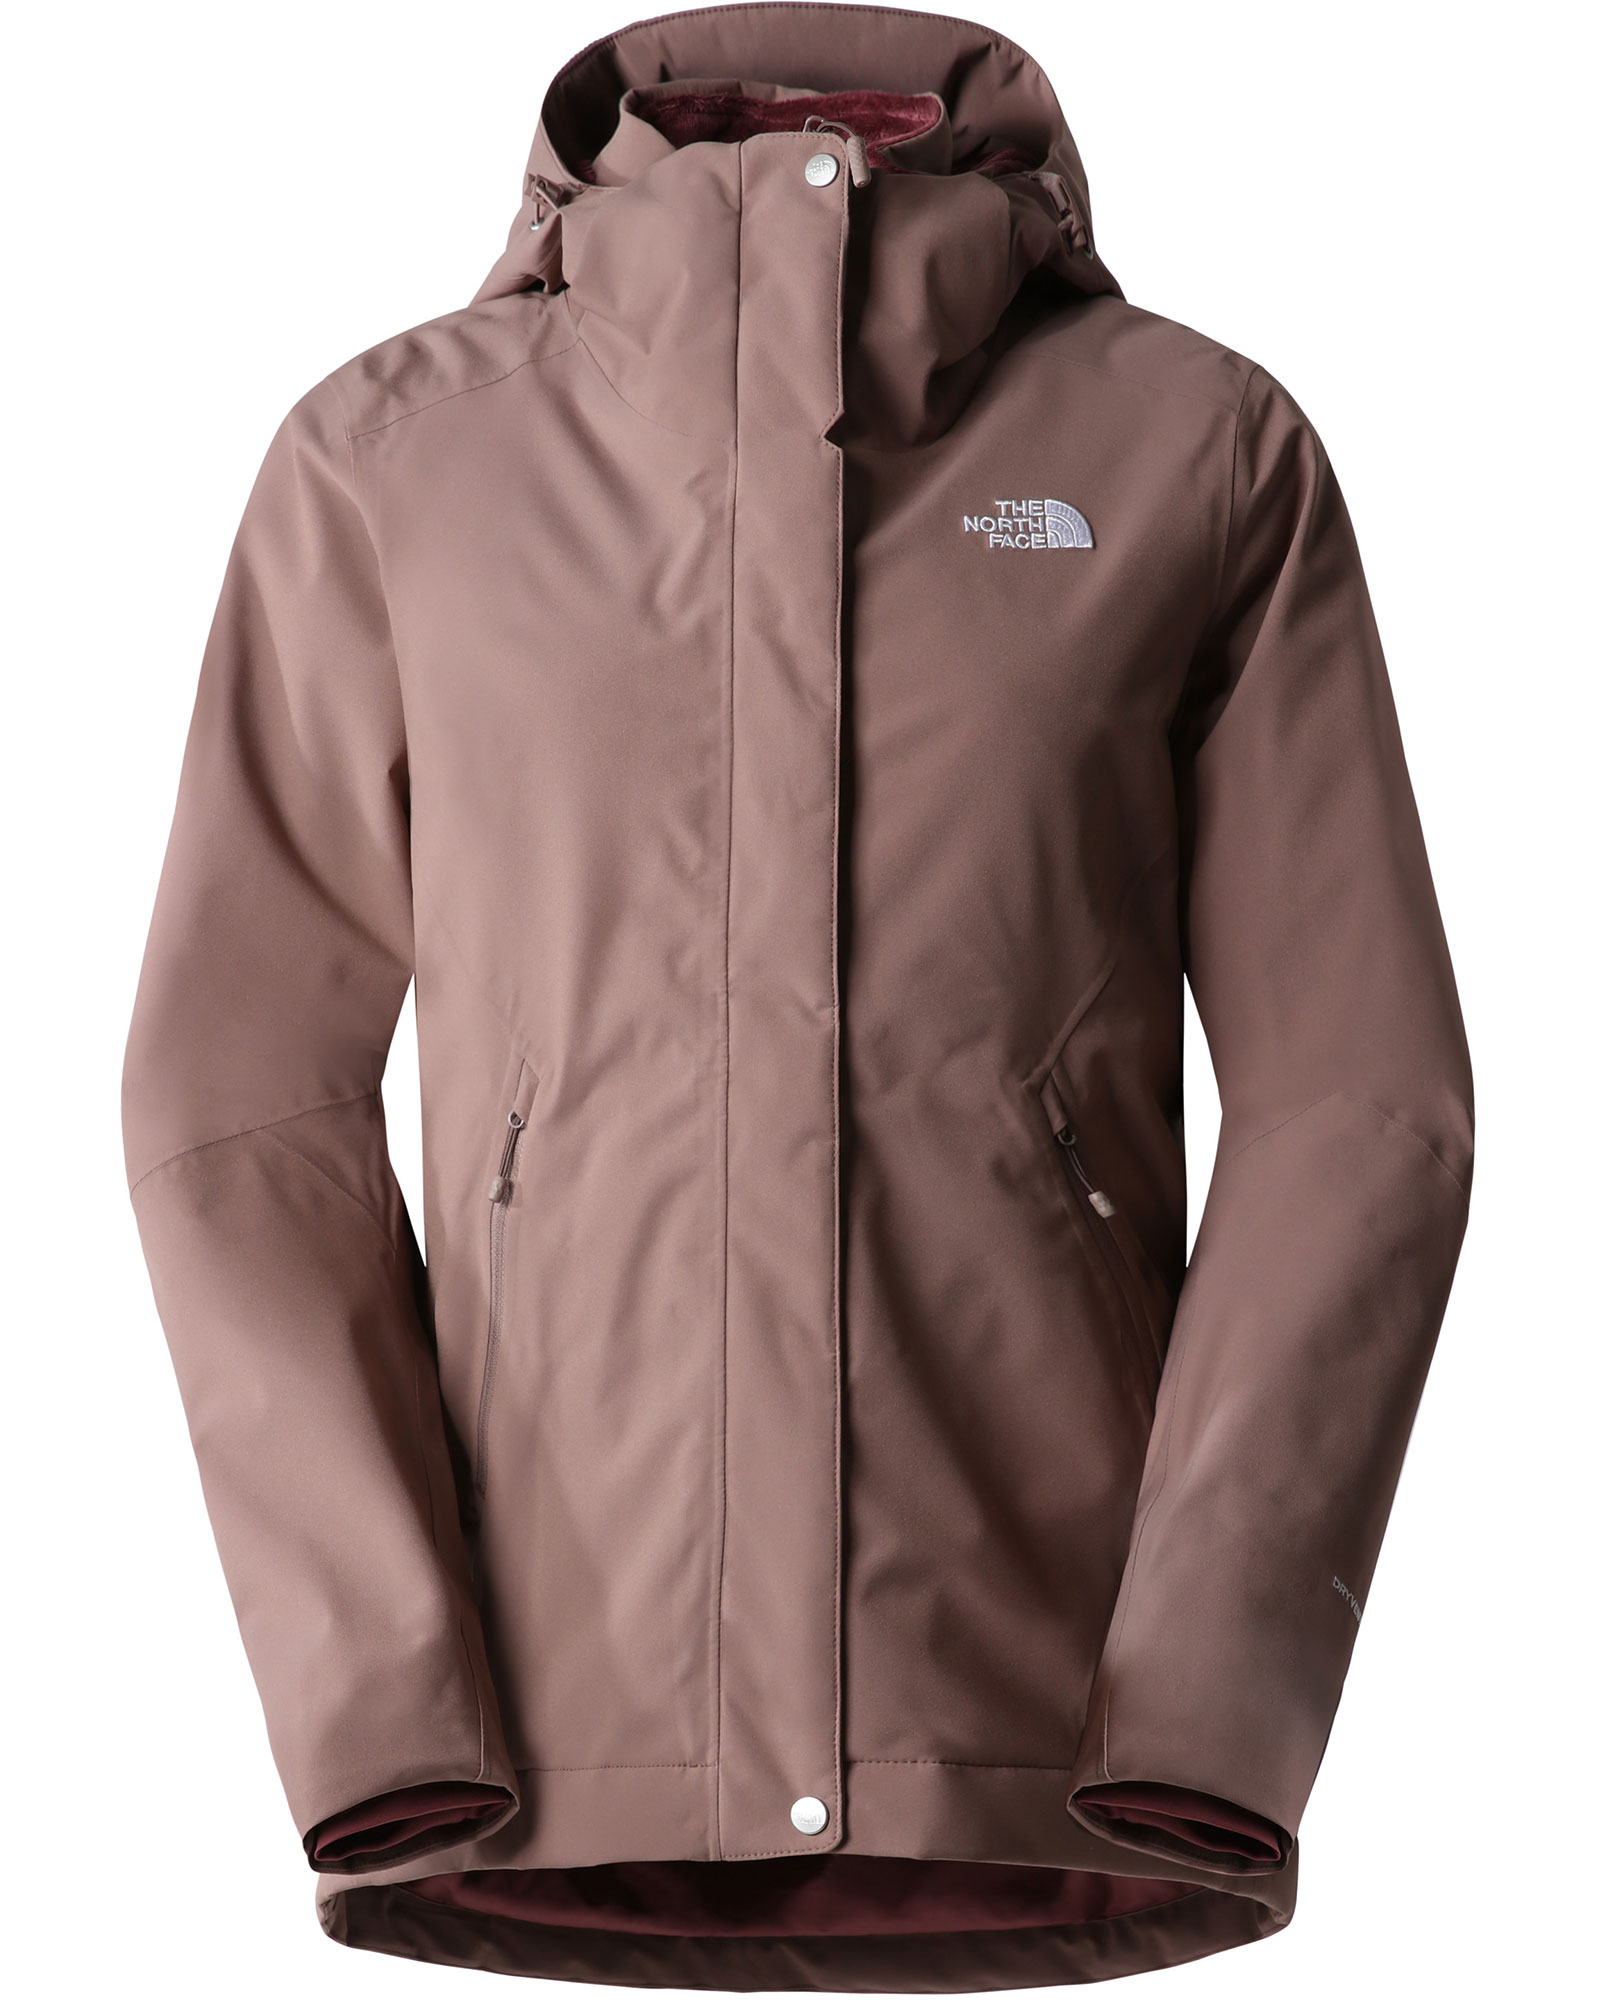 The North Face Inlux Insulated DryVent Women’s Insulated Jacket - Deep Taupe XS